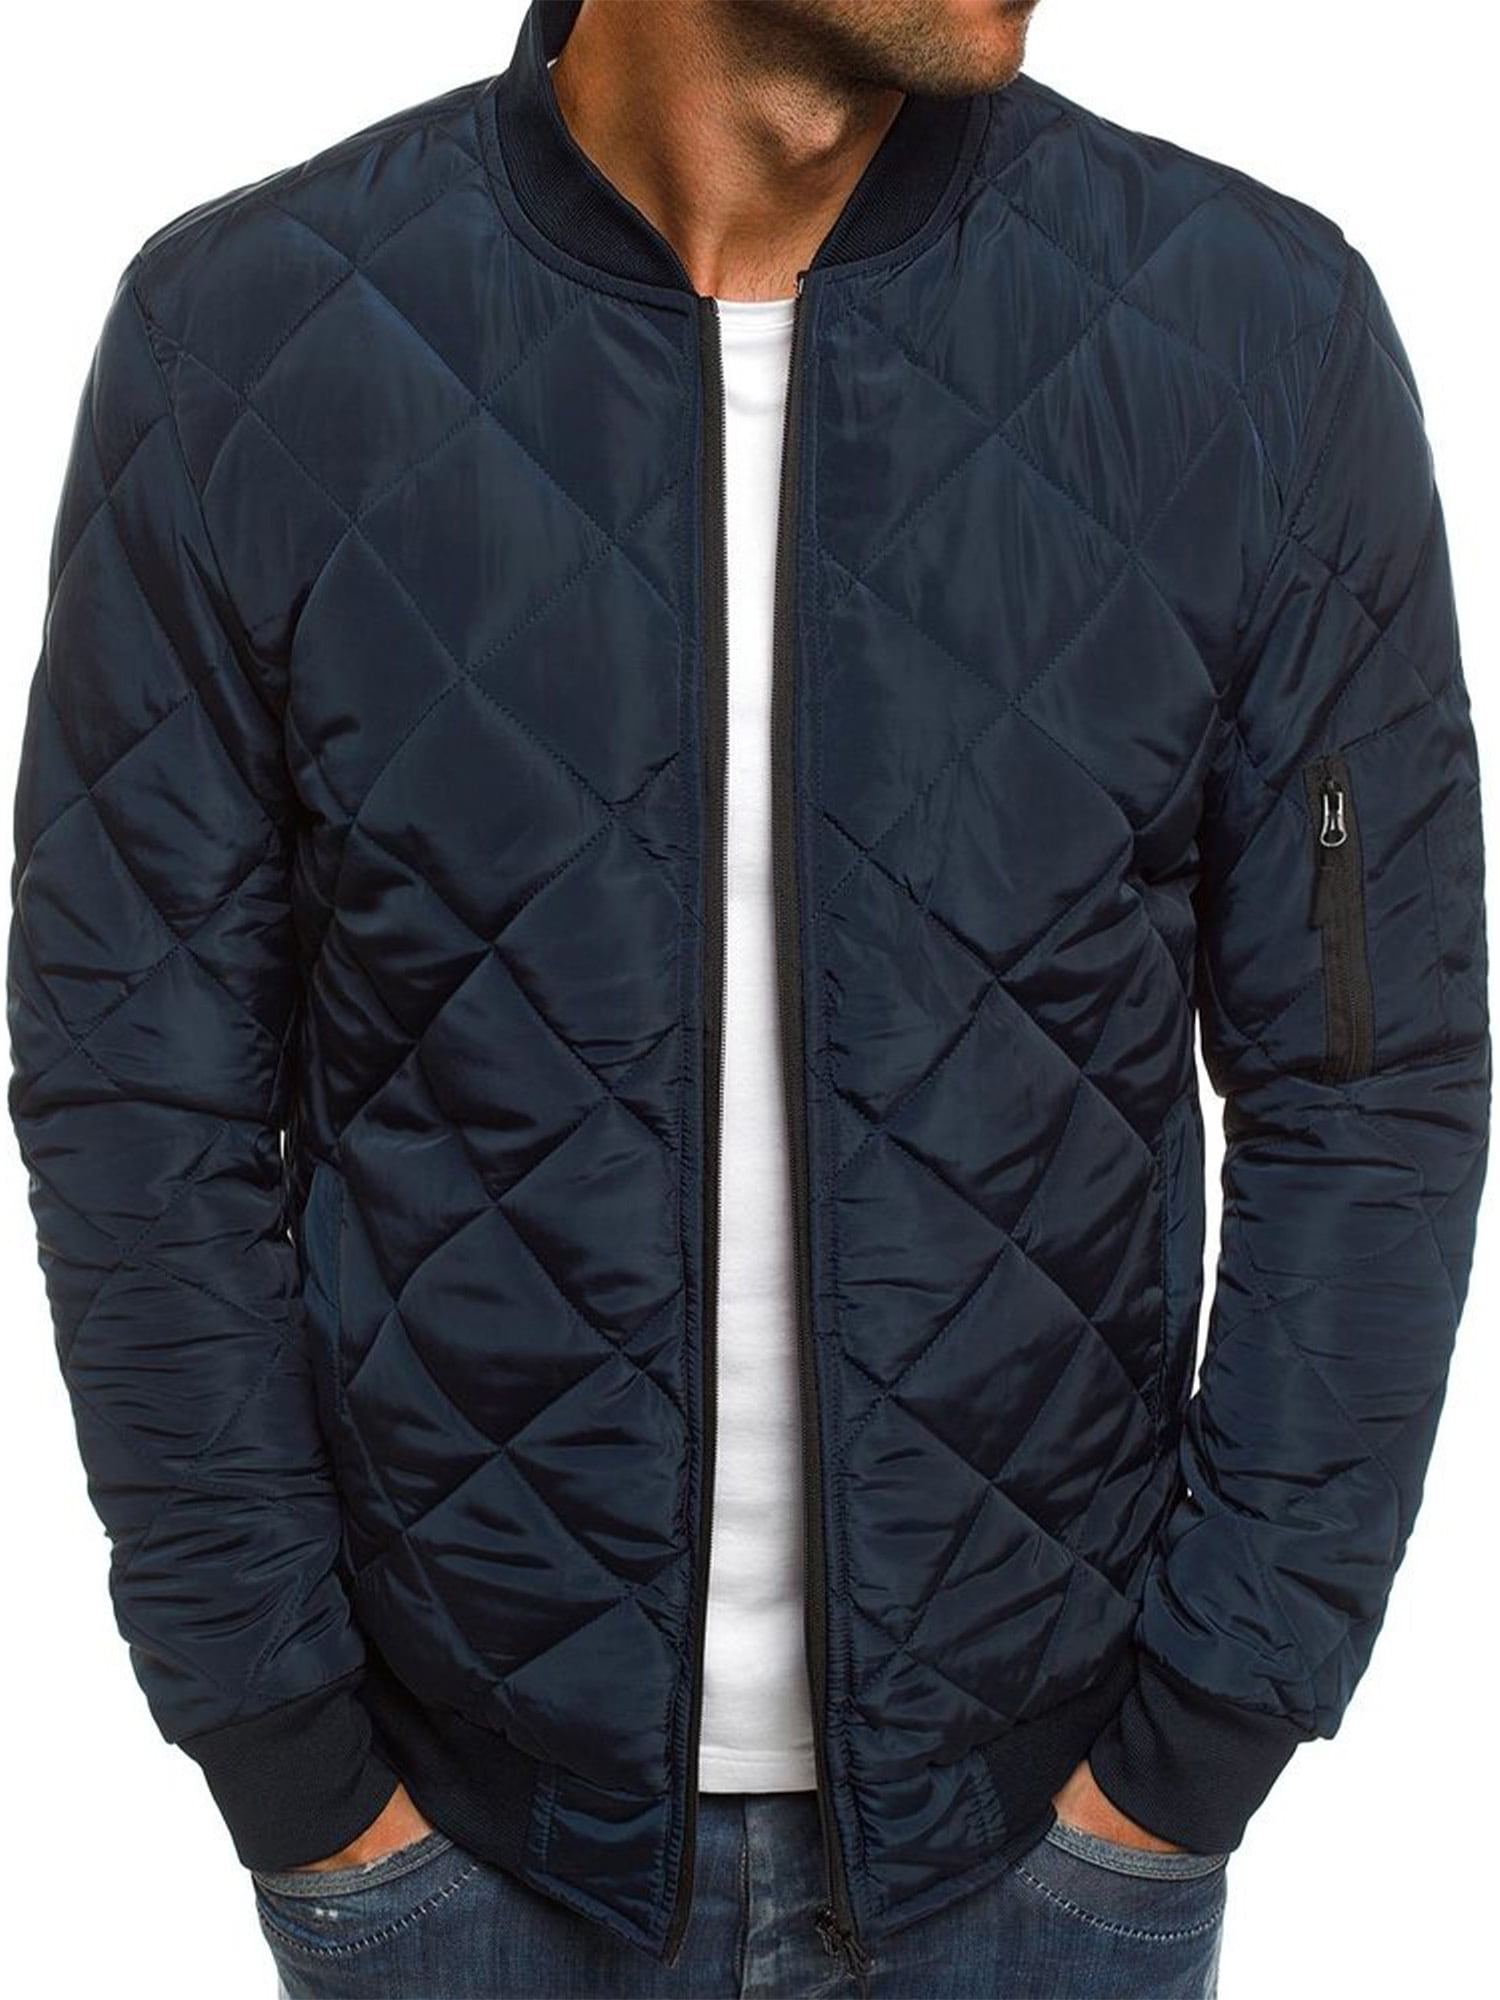 Winter Jacket Men Quilted Jackets Stand Collar Cotton Padded Thick Warm Coast for Man Outwear